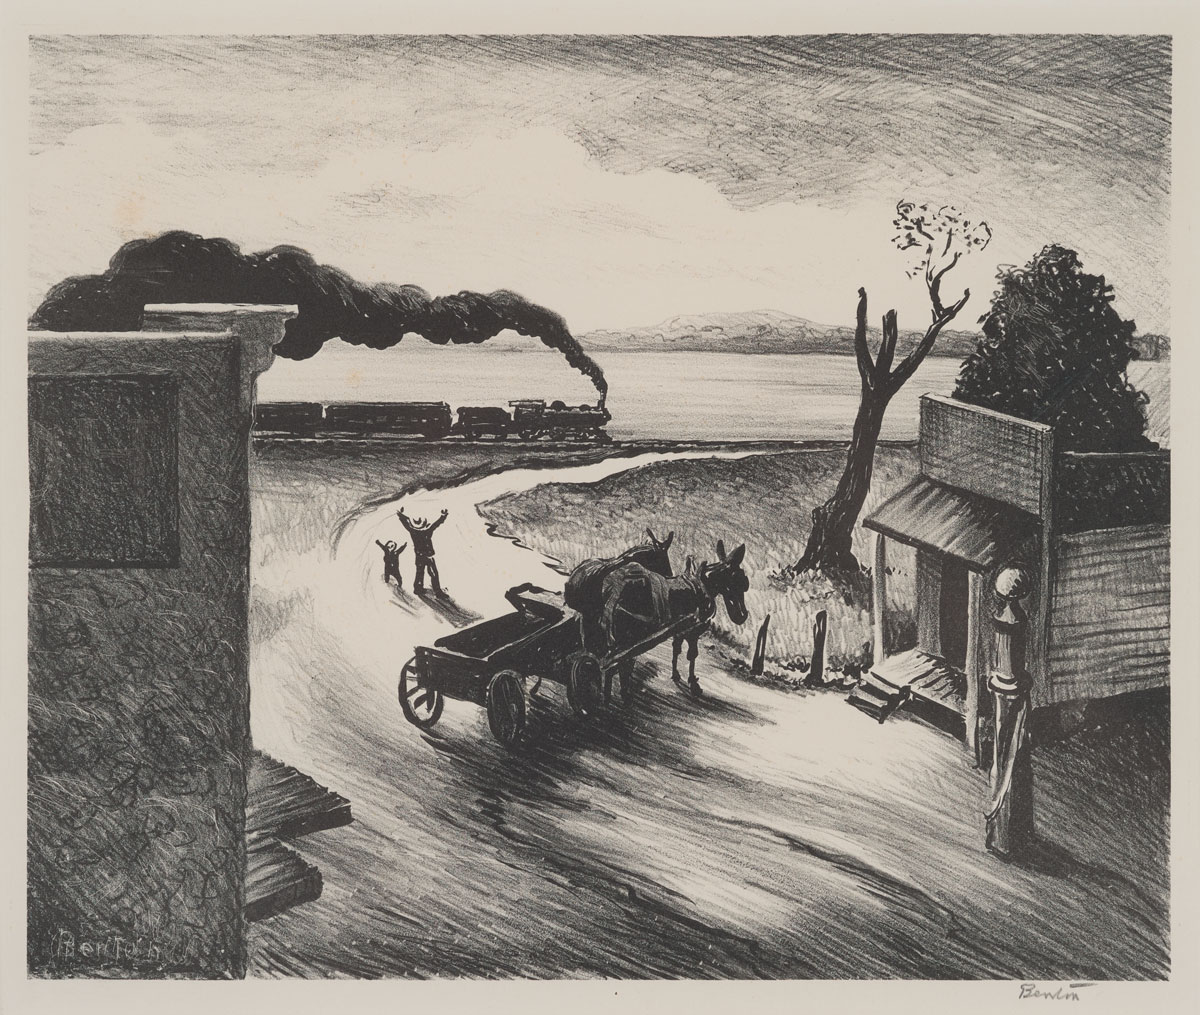 Thomas Hart Benton (American, 1889-1975), Edge of Town, 1938, lithograph, edition of 250, 9 x 10¾ inches, on permanent loan, courtesy of the Fine Arts Program, U.S. General Services Administration